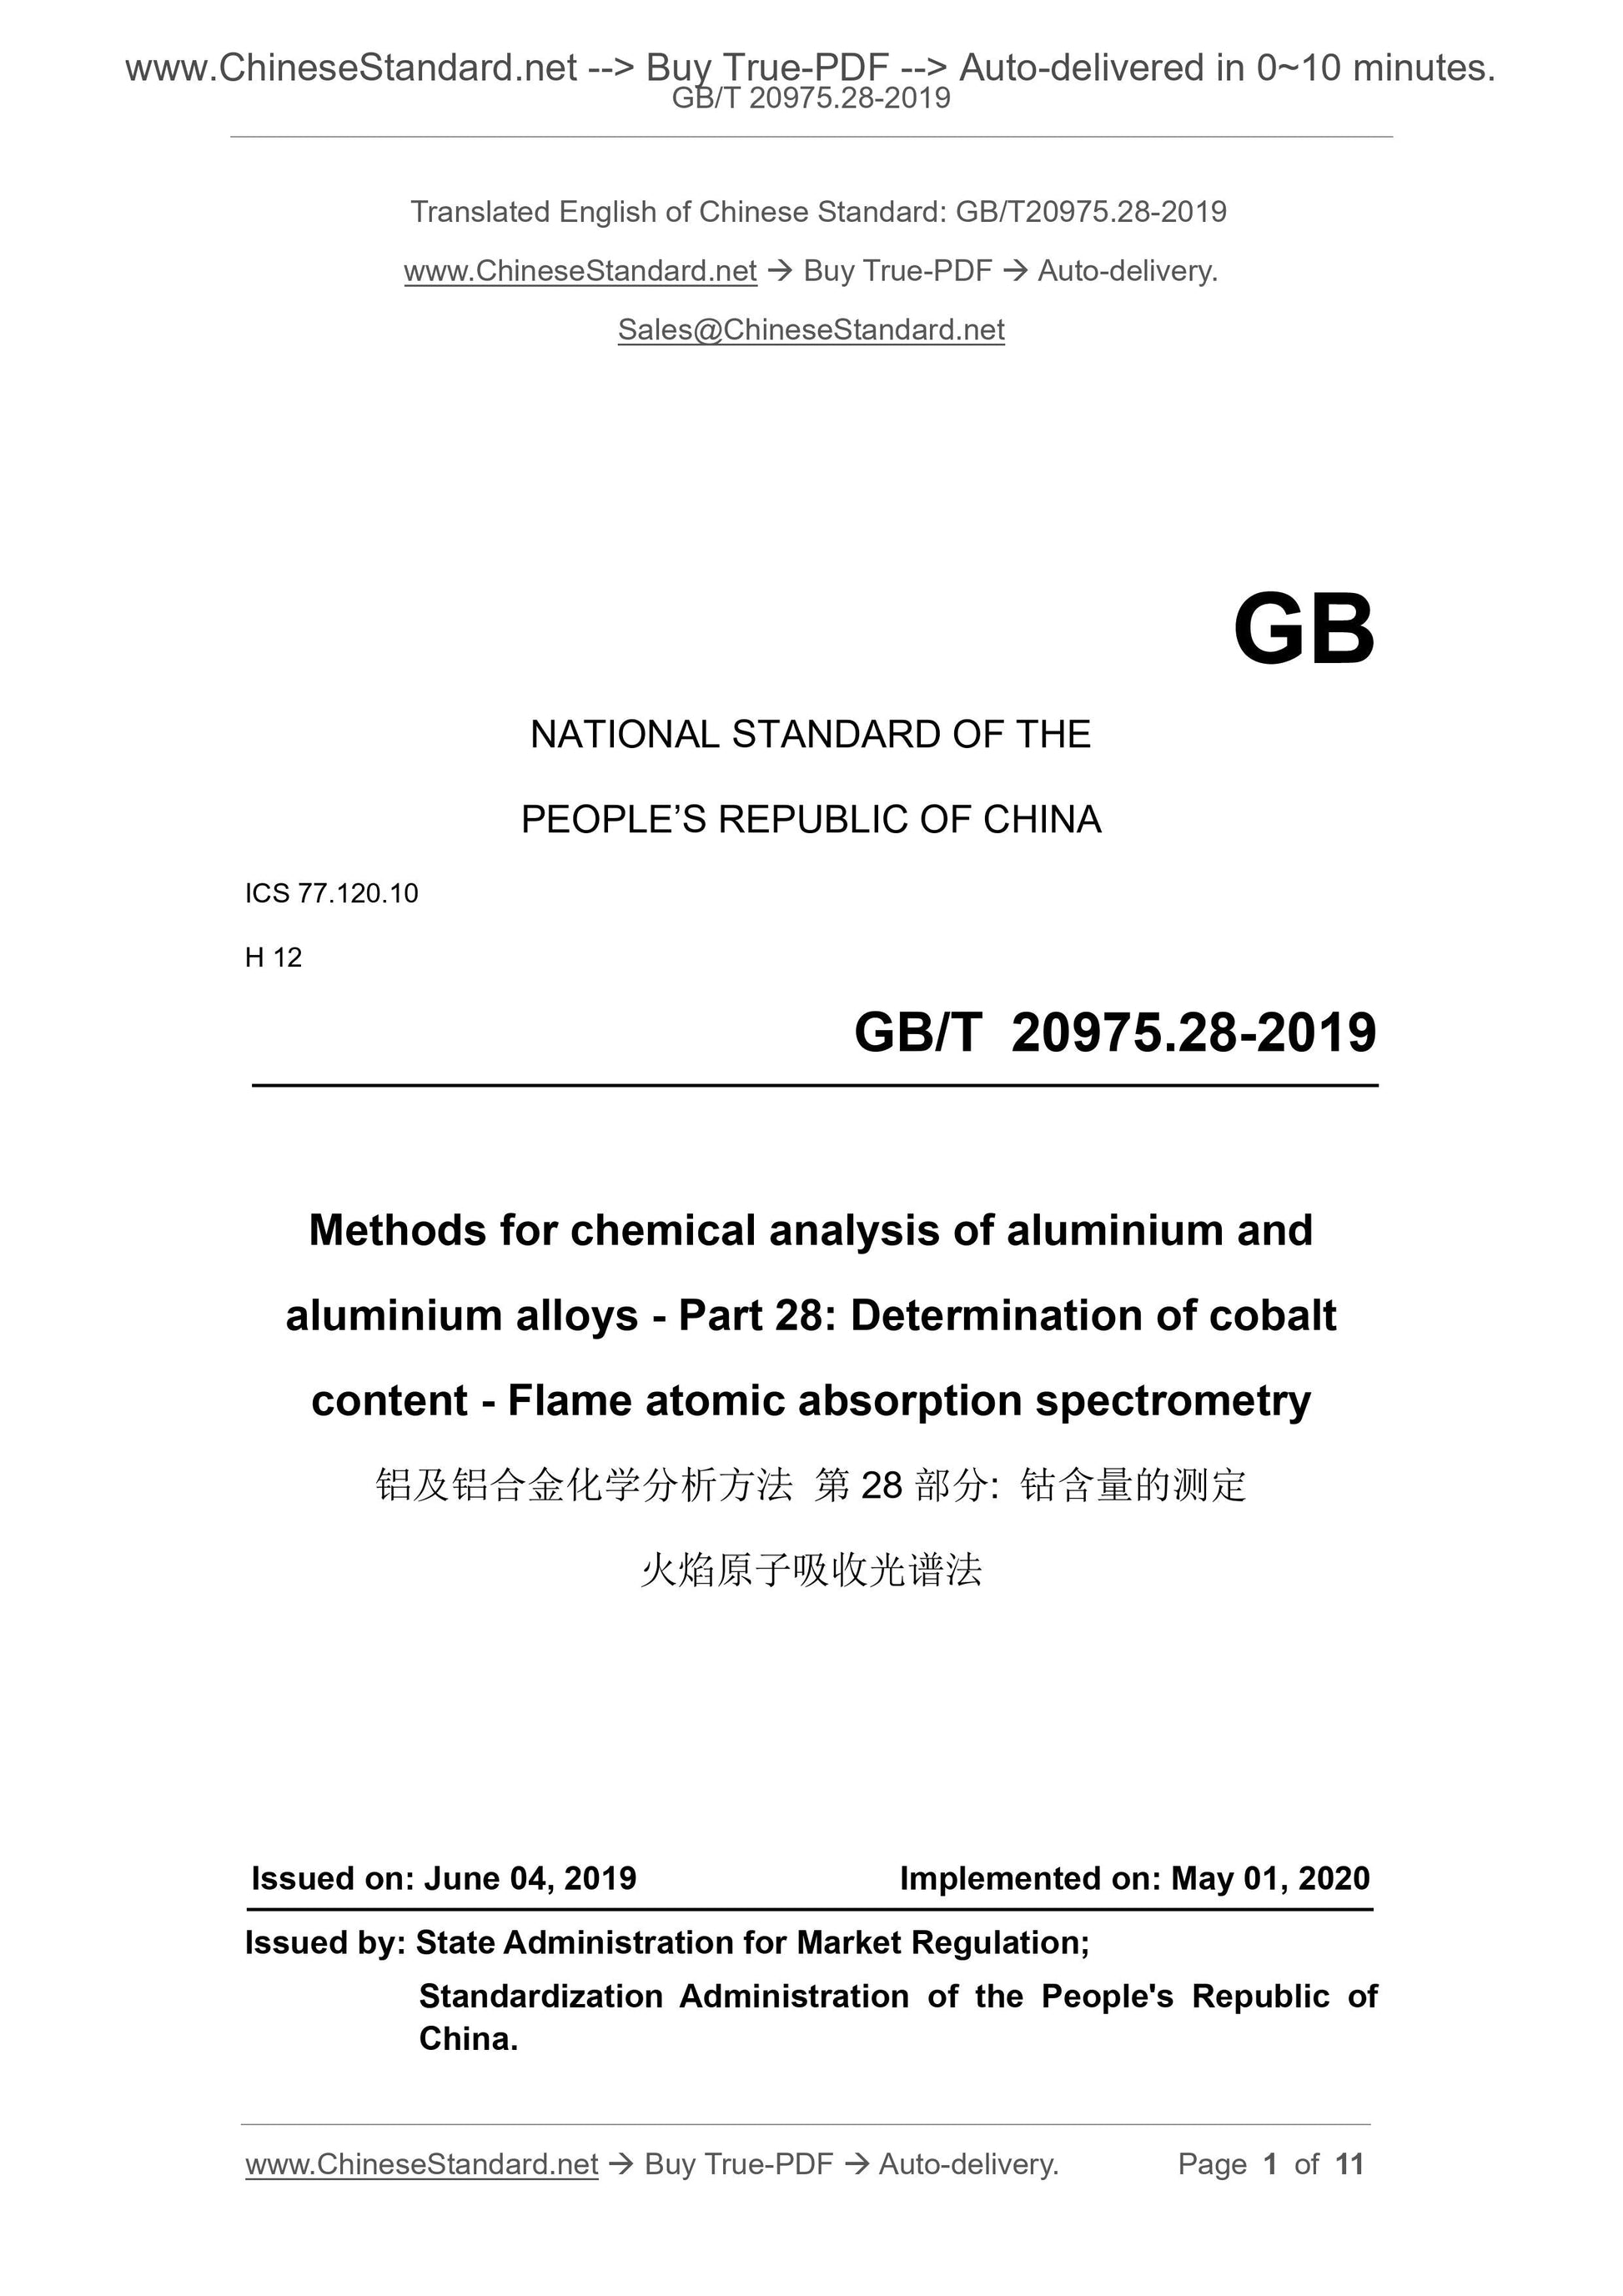 GB/T 20975.28-2019 Page 1